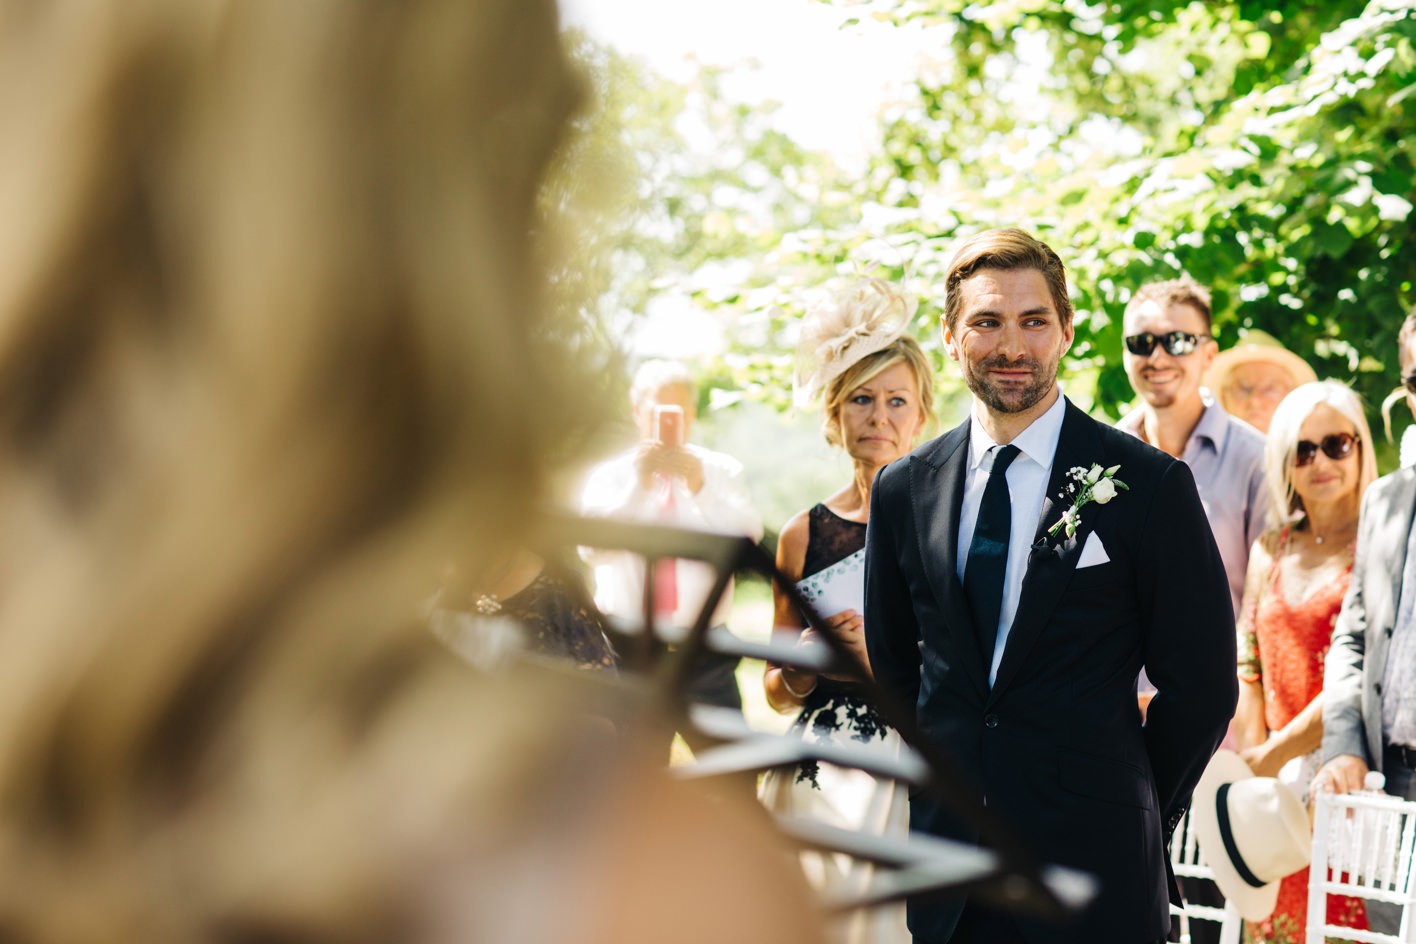 Groom seeing bride for first time at outdoor wedding ceremony